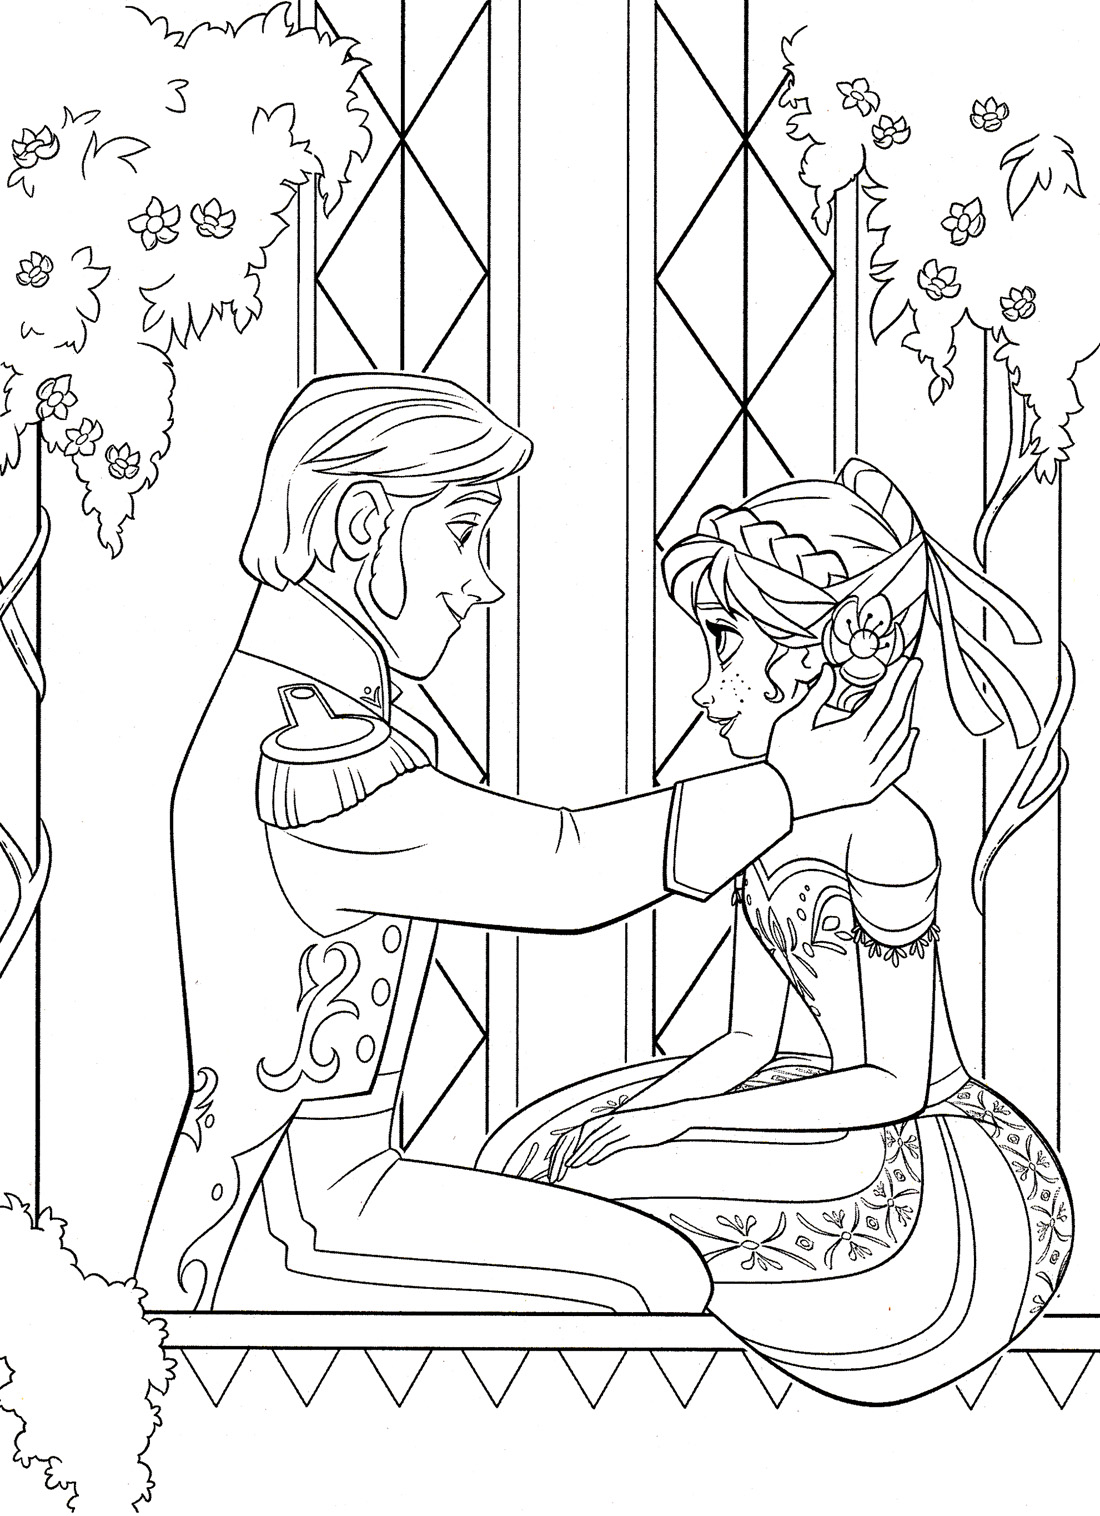 Simple Frozen coloring page for children : Hans and Elsa